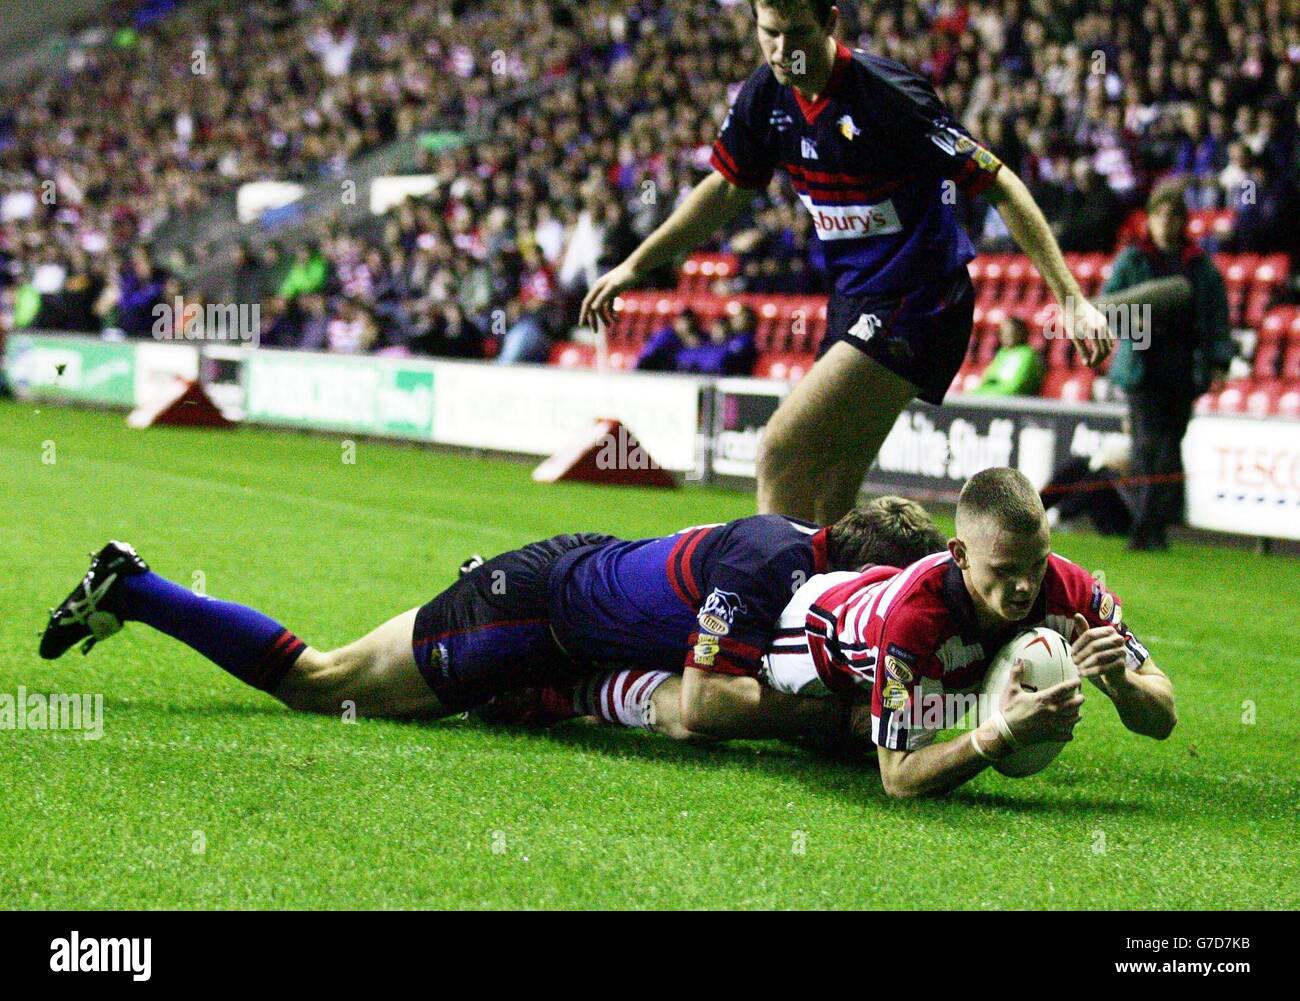 Wigan's Kevin Brown (right) scores against Wakefield during the Tetley's Super League qualifying semi-final at the JJB Stadium, Wigan. ** Stock Photo